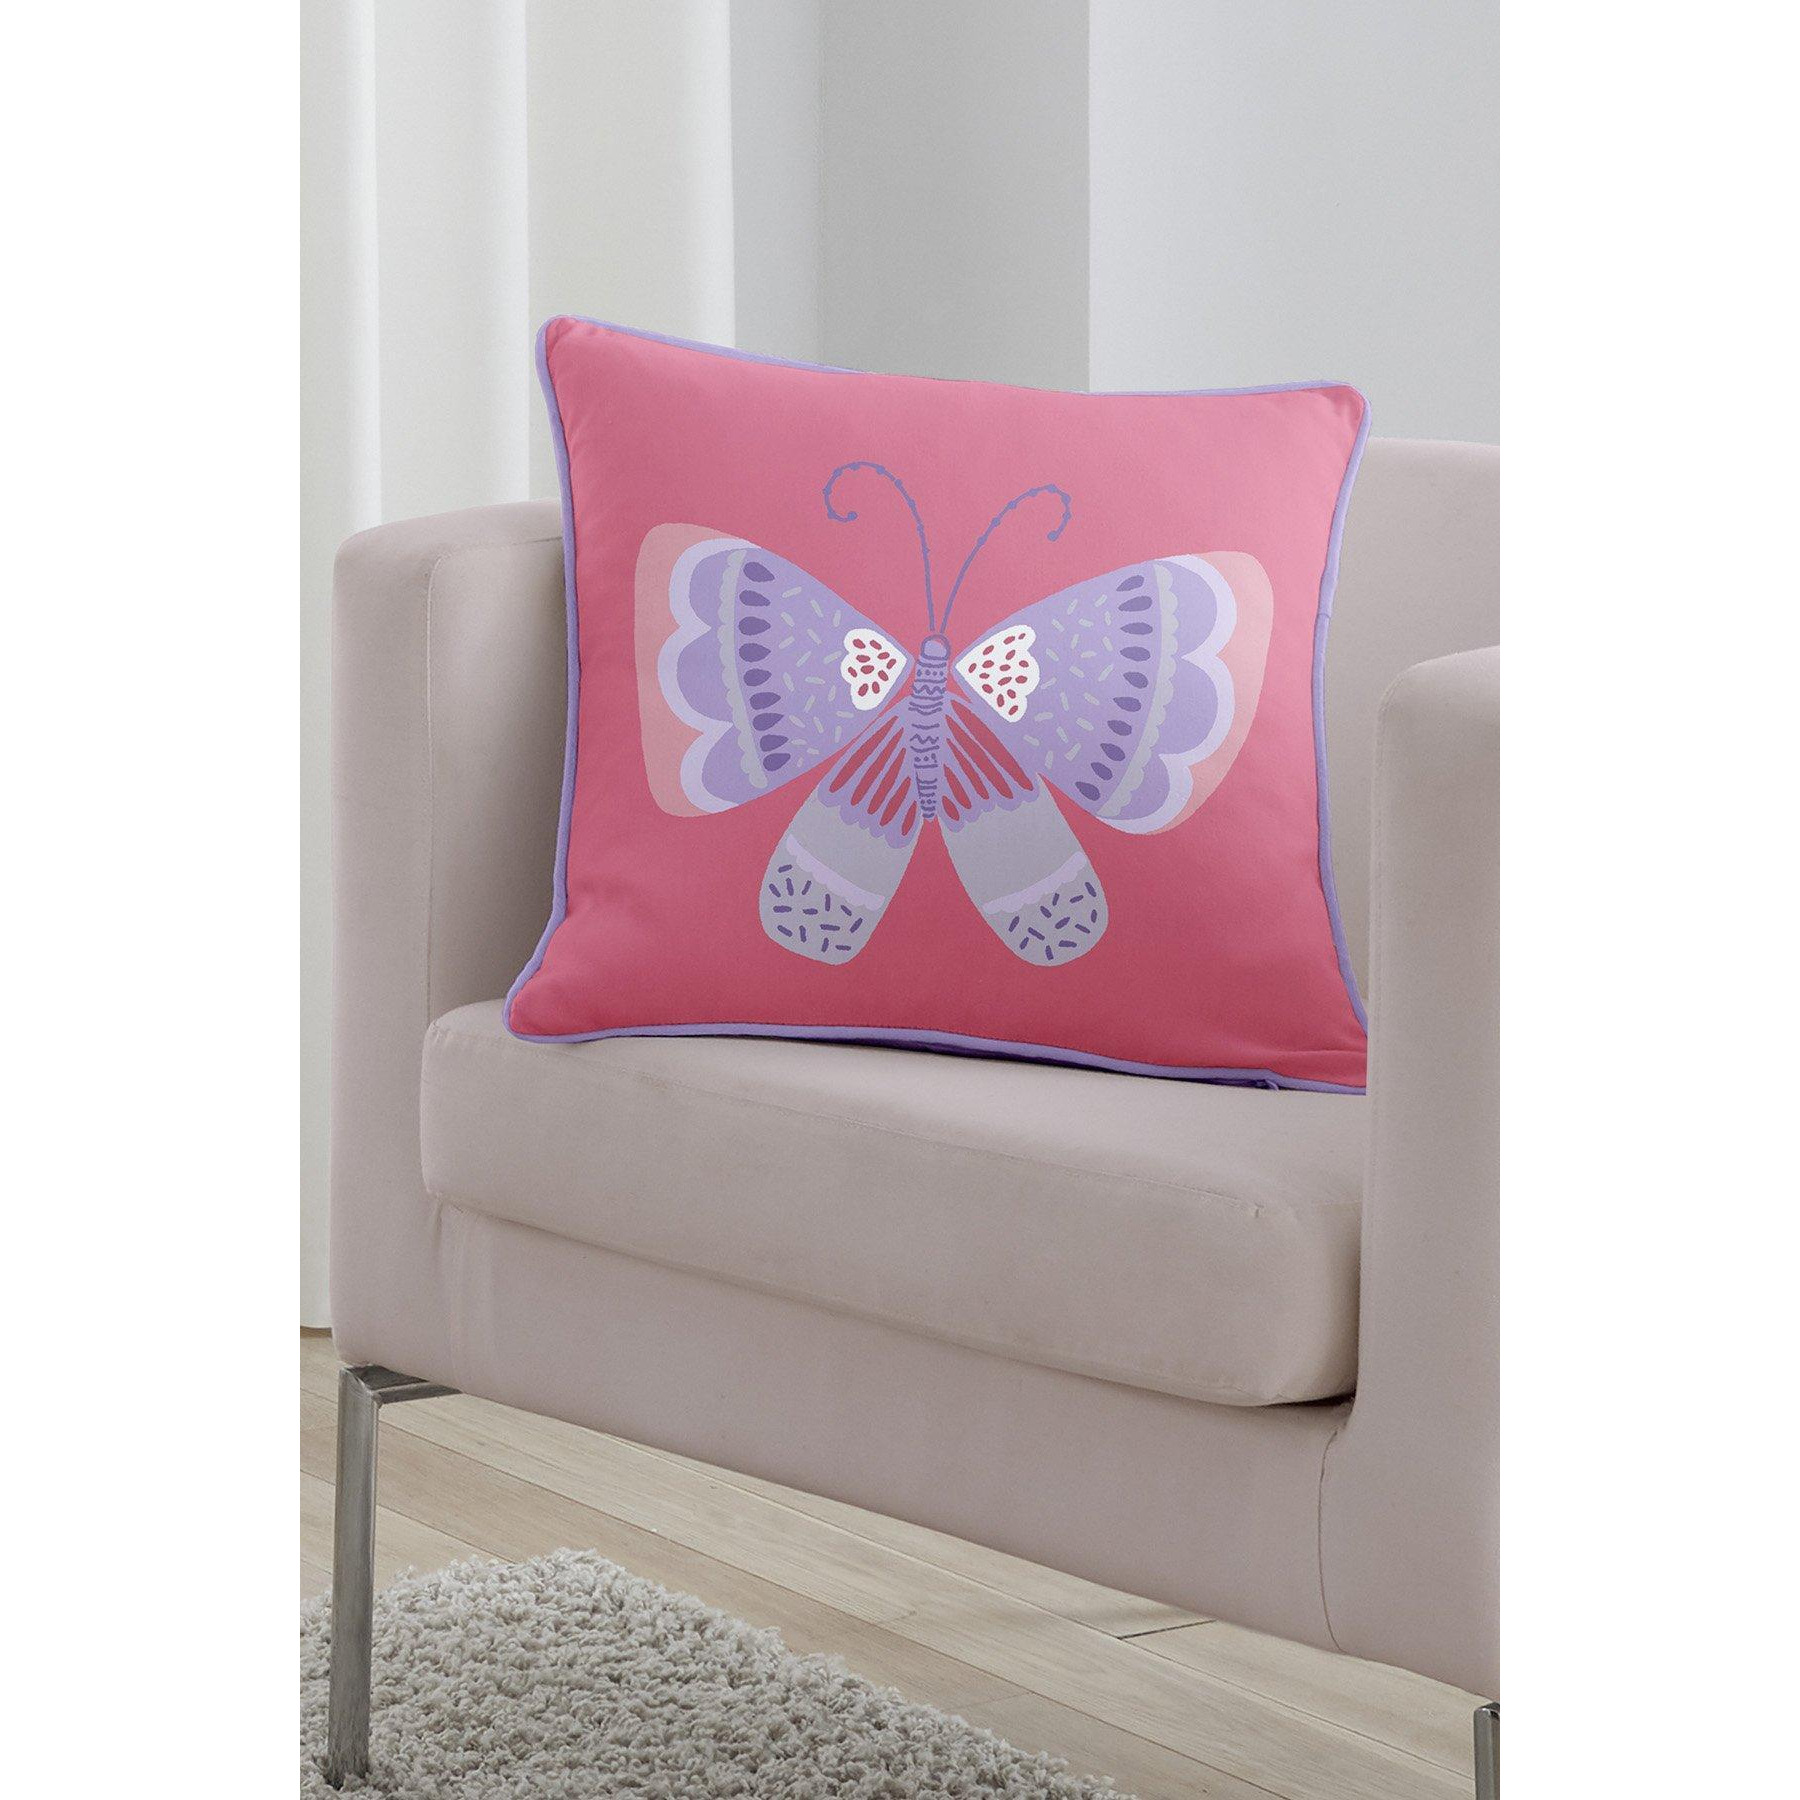 'Flutterby Butterfly' Soft Touch Velvet Filled Cushion - image 1